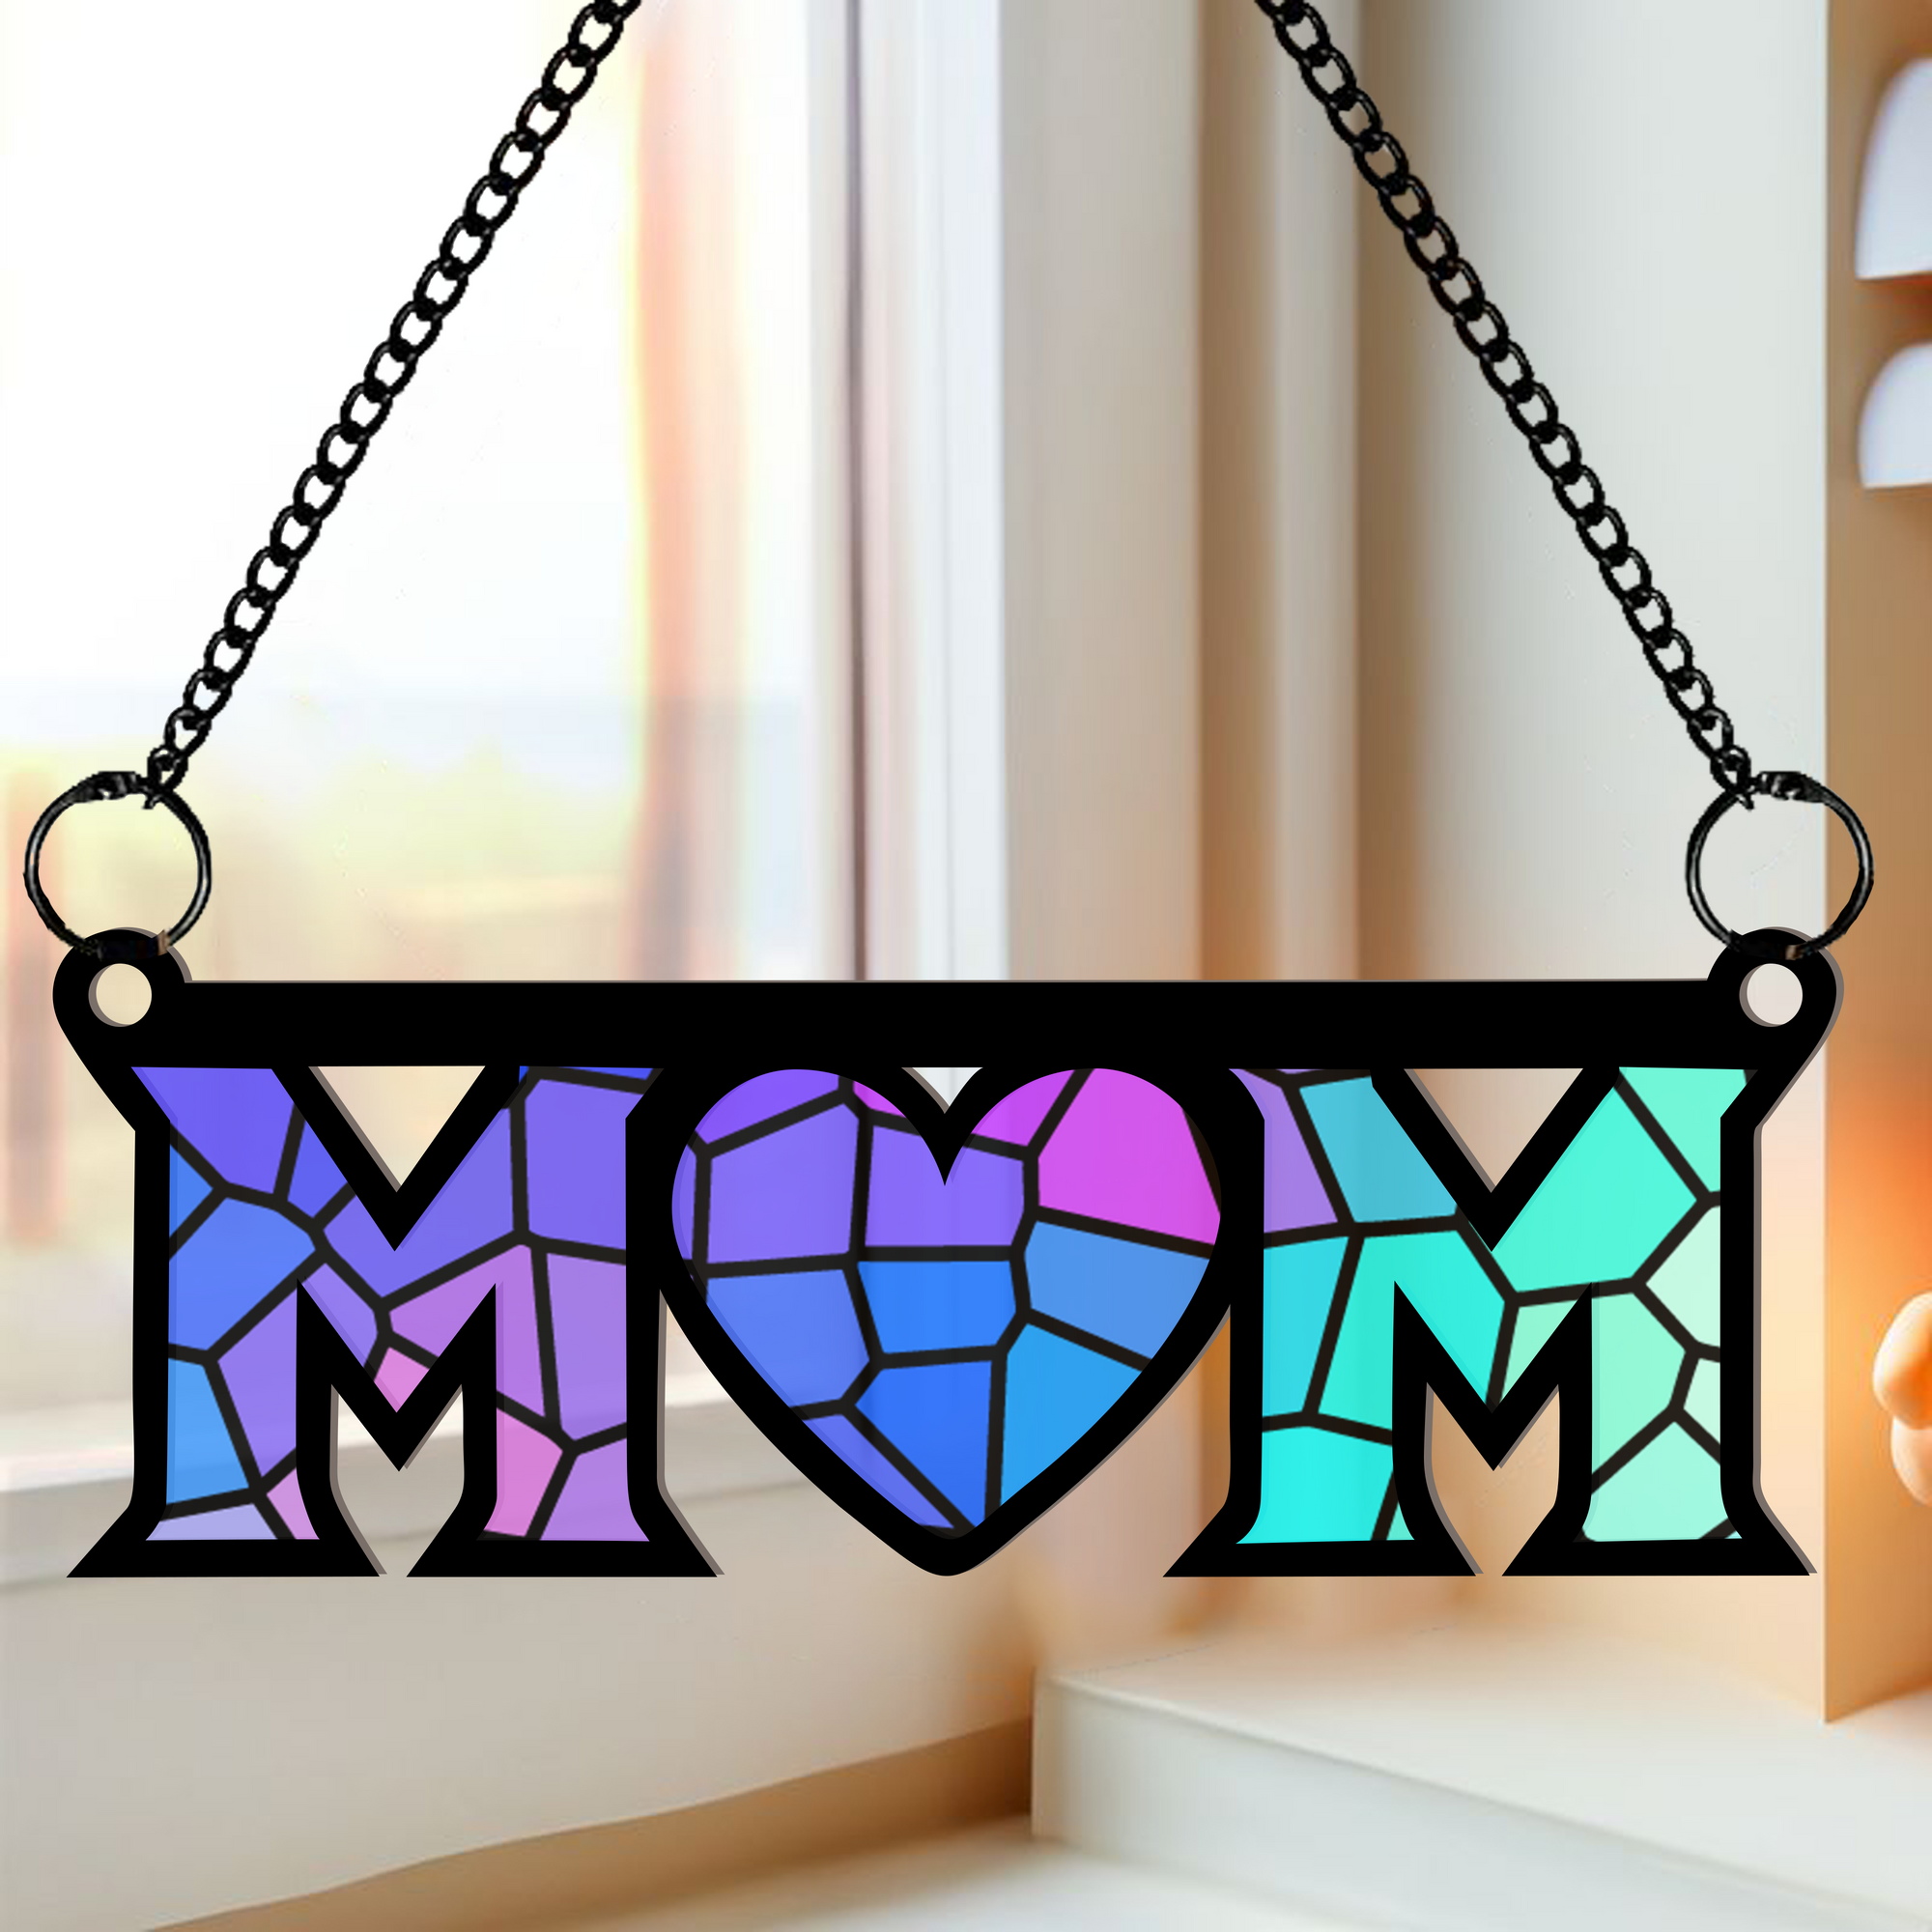 Mother's Day Gift For Mom - Personalized Window Hanging Suncatcher Ornament